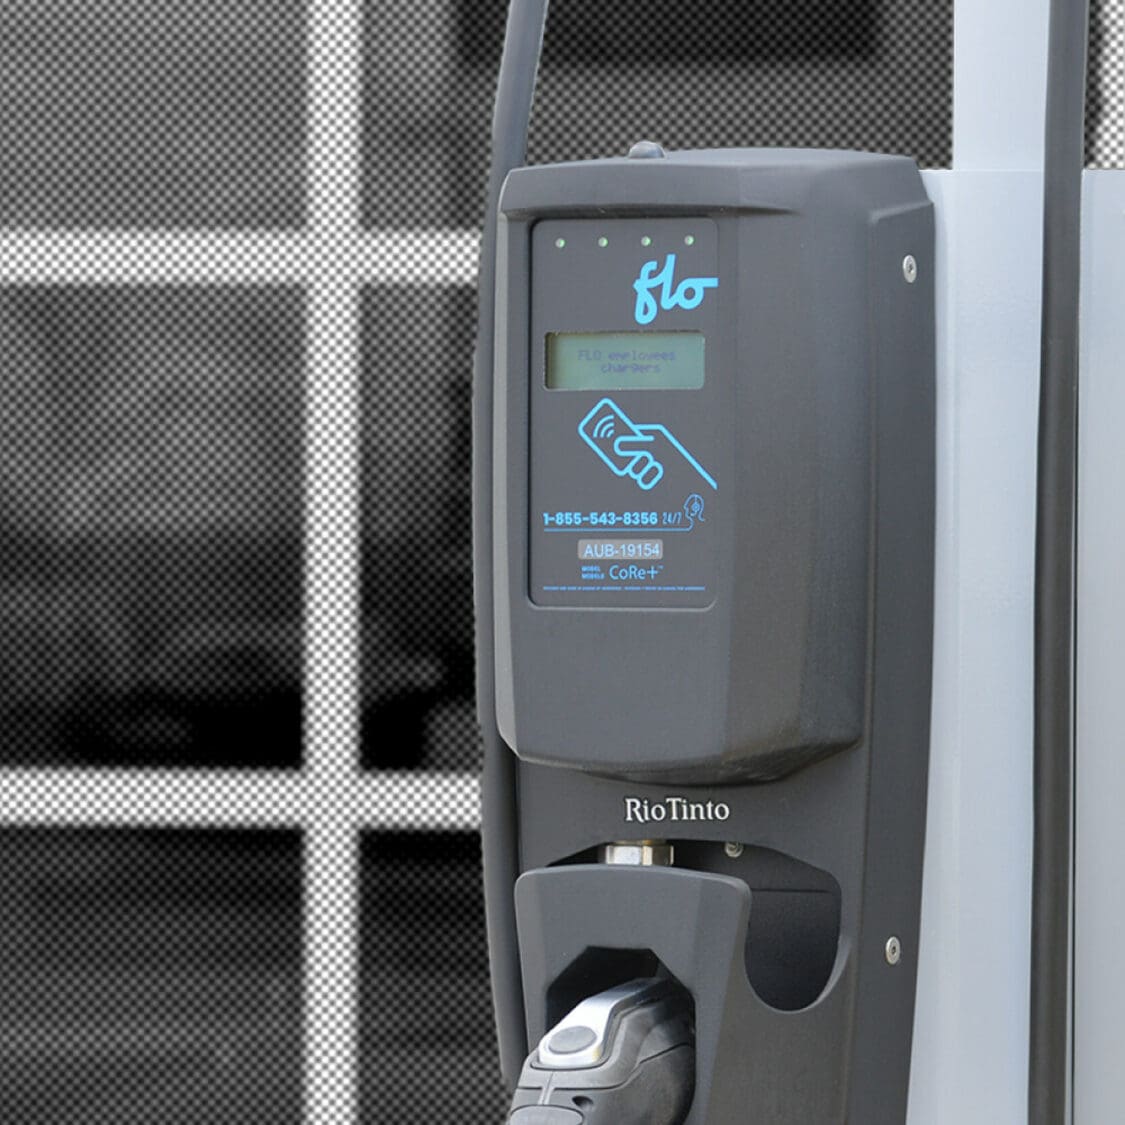 GM Global Technical Center Powers Up with Largest Deployment of FLO Charging Stations